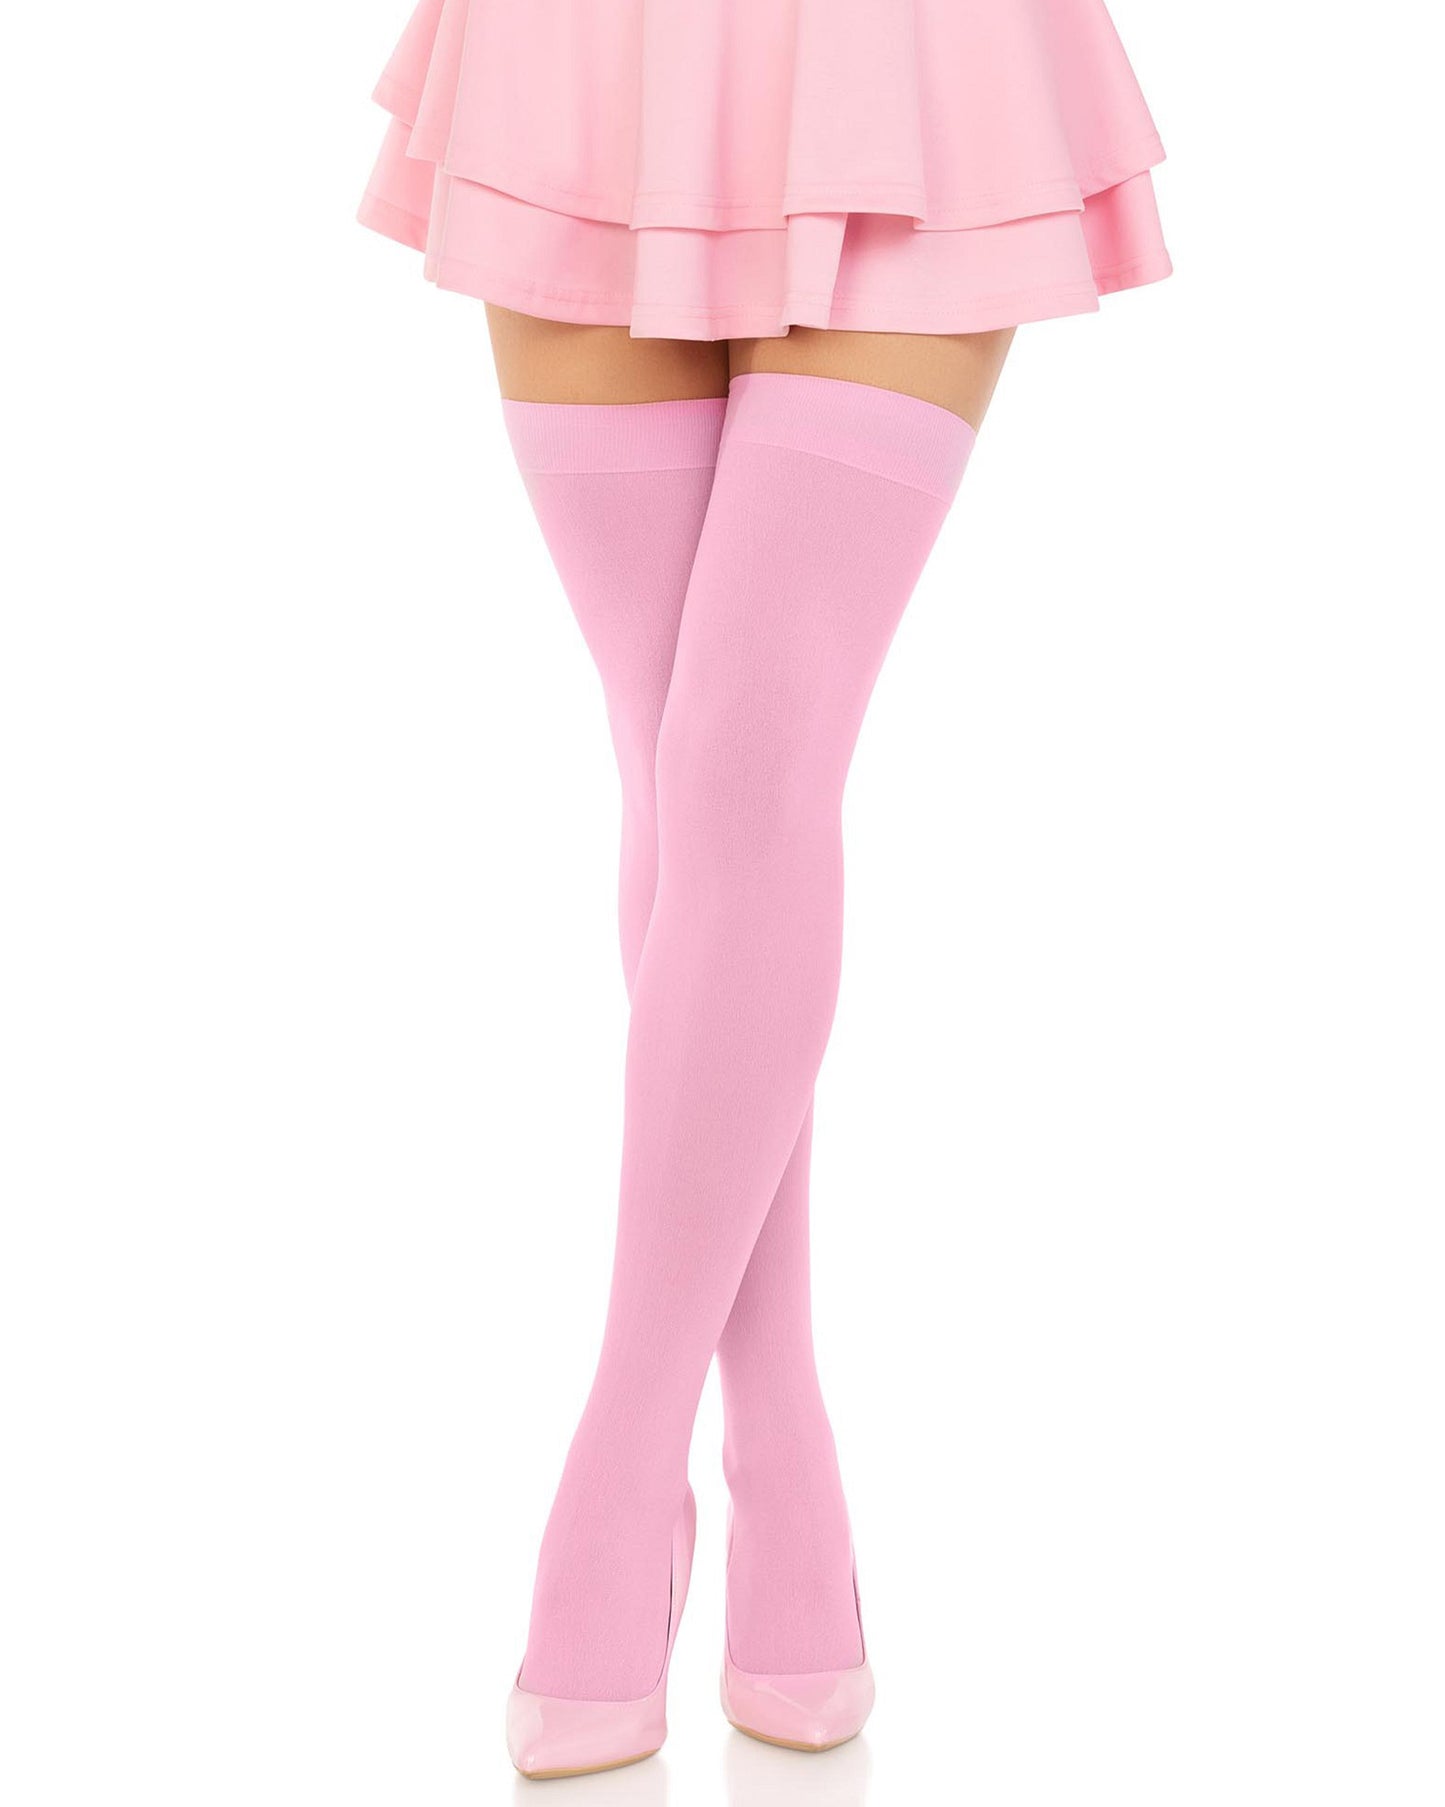 Leg Avenue 6672 Nylon Thigh Highs - Pale baby pink opaque over the knee socks / stockings